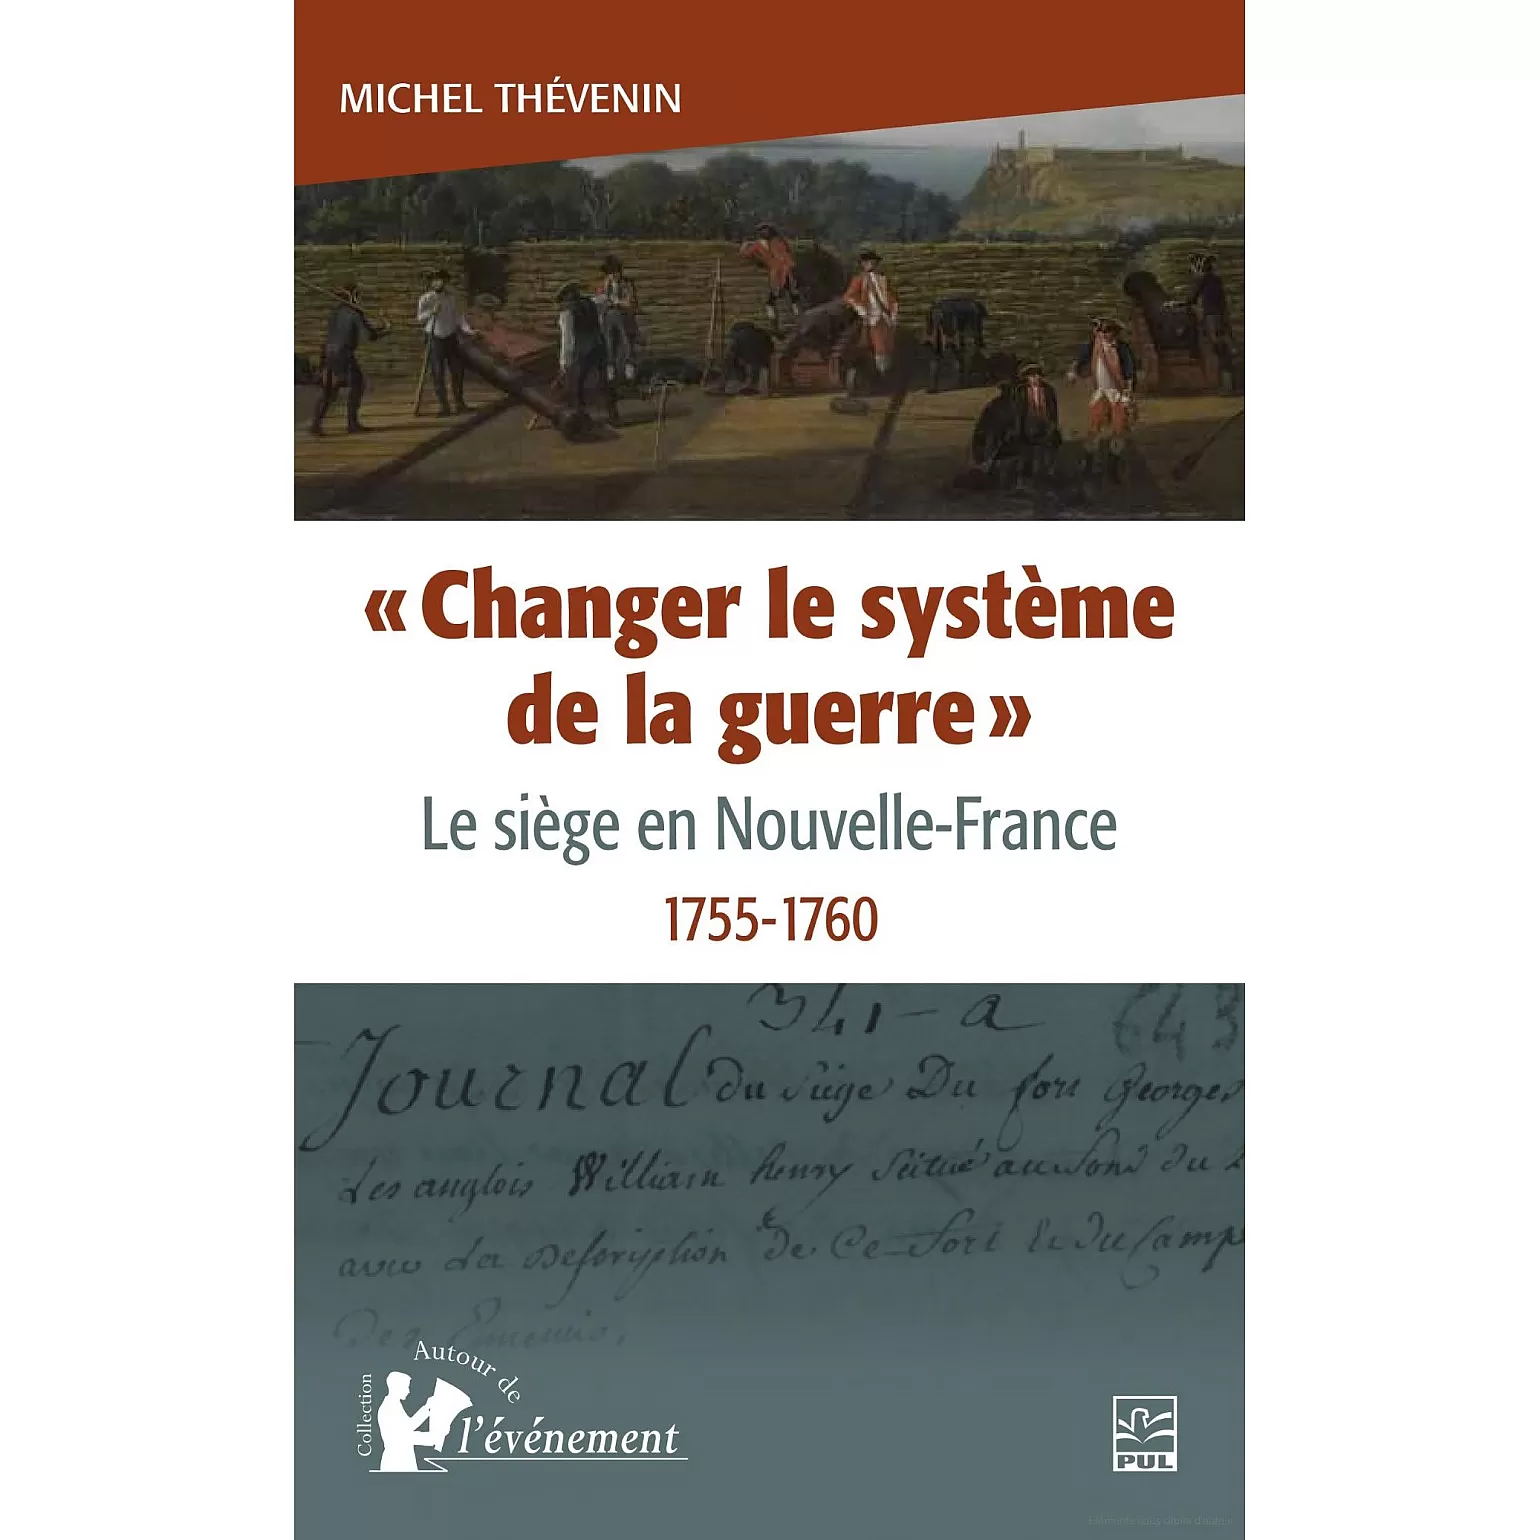 Changer systeme guerre 1